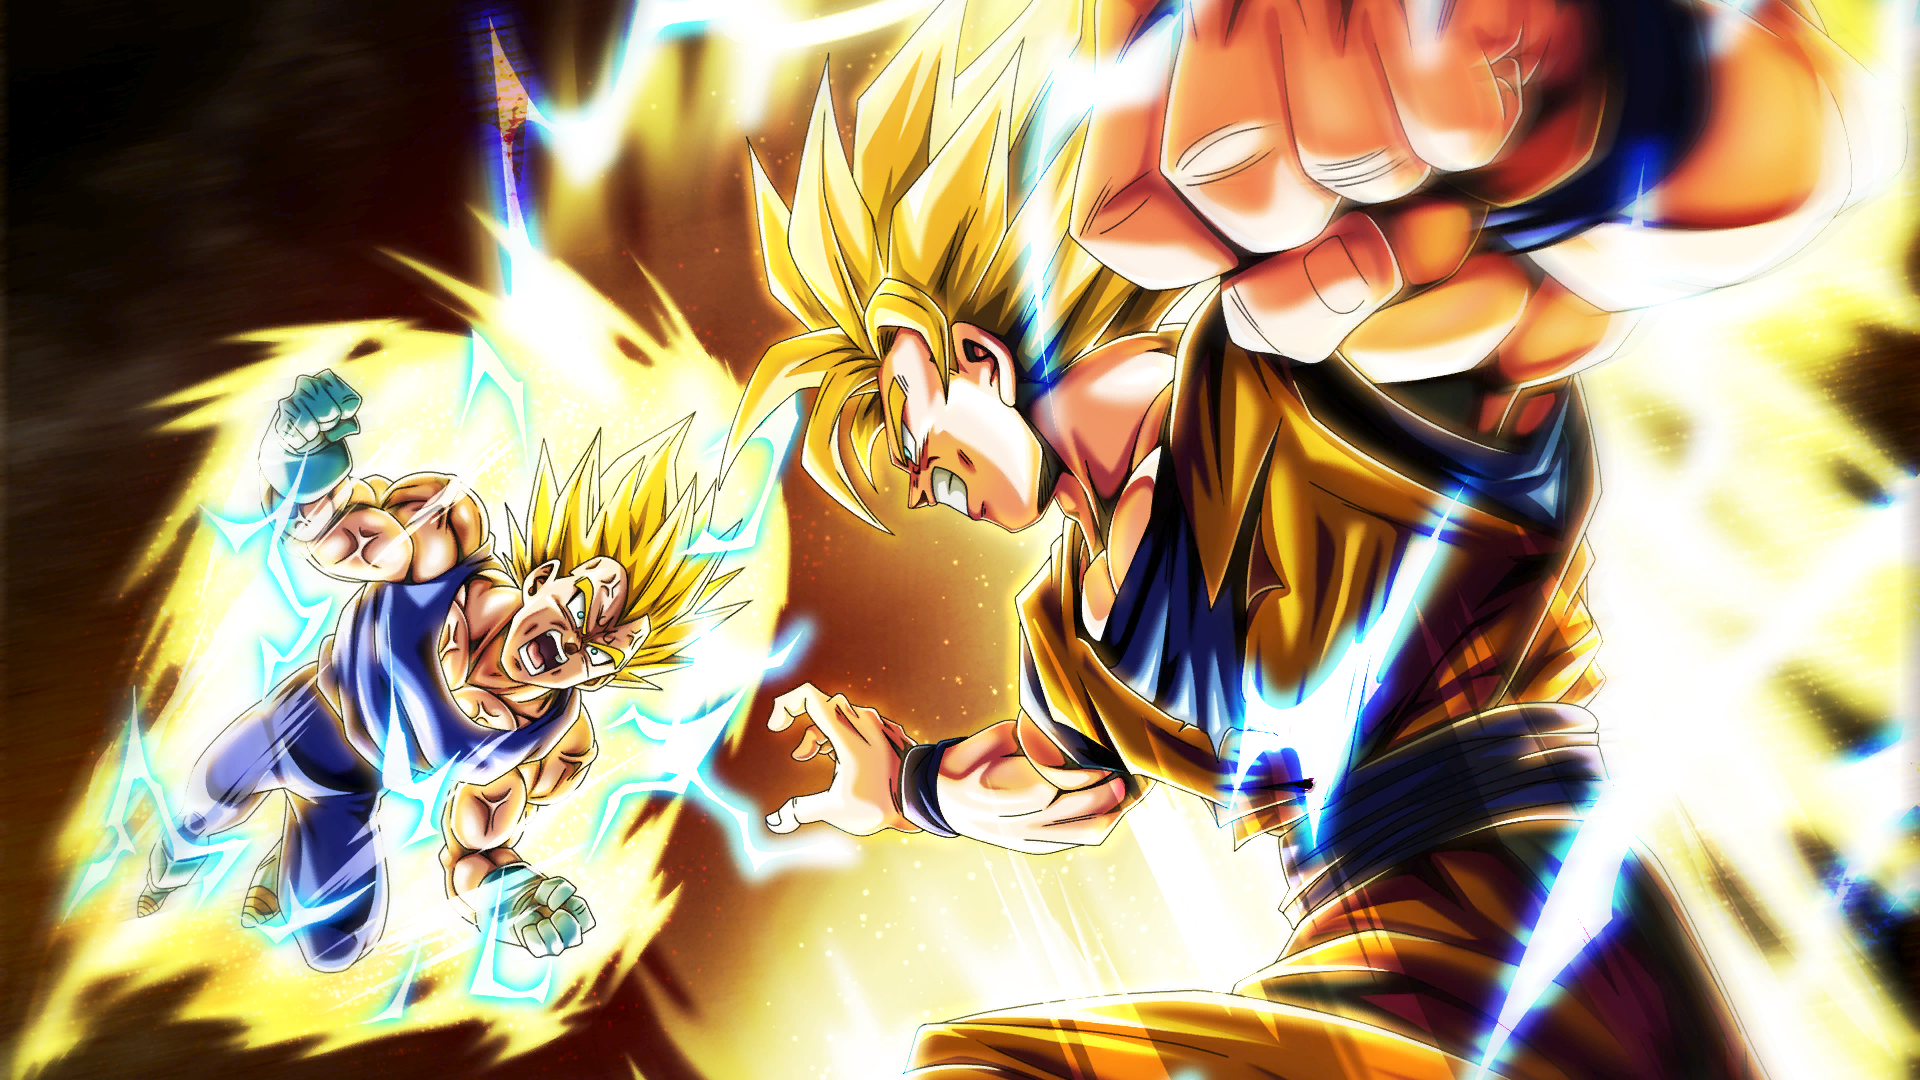 Dbz Wallpapers HD All Saiyans (61+ images)